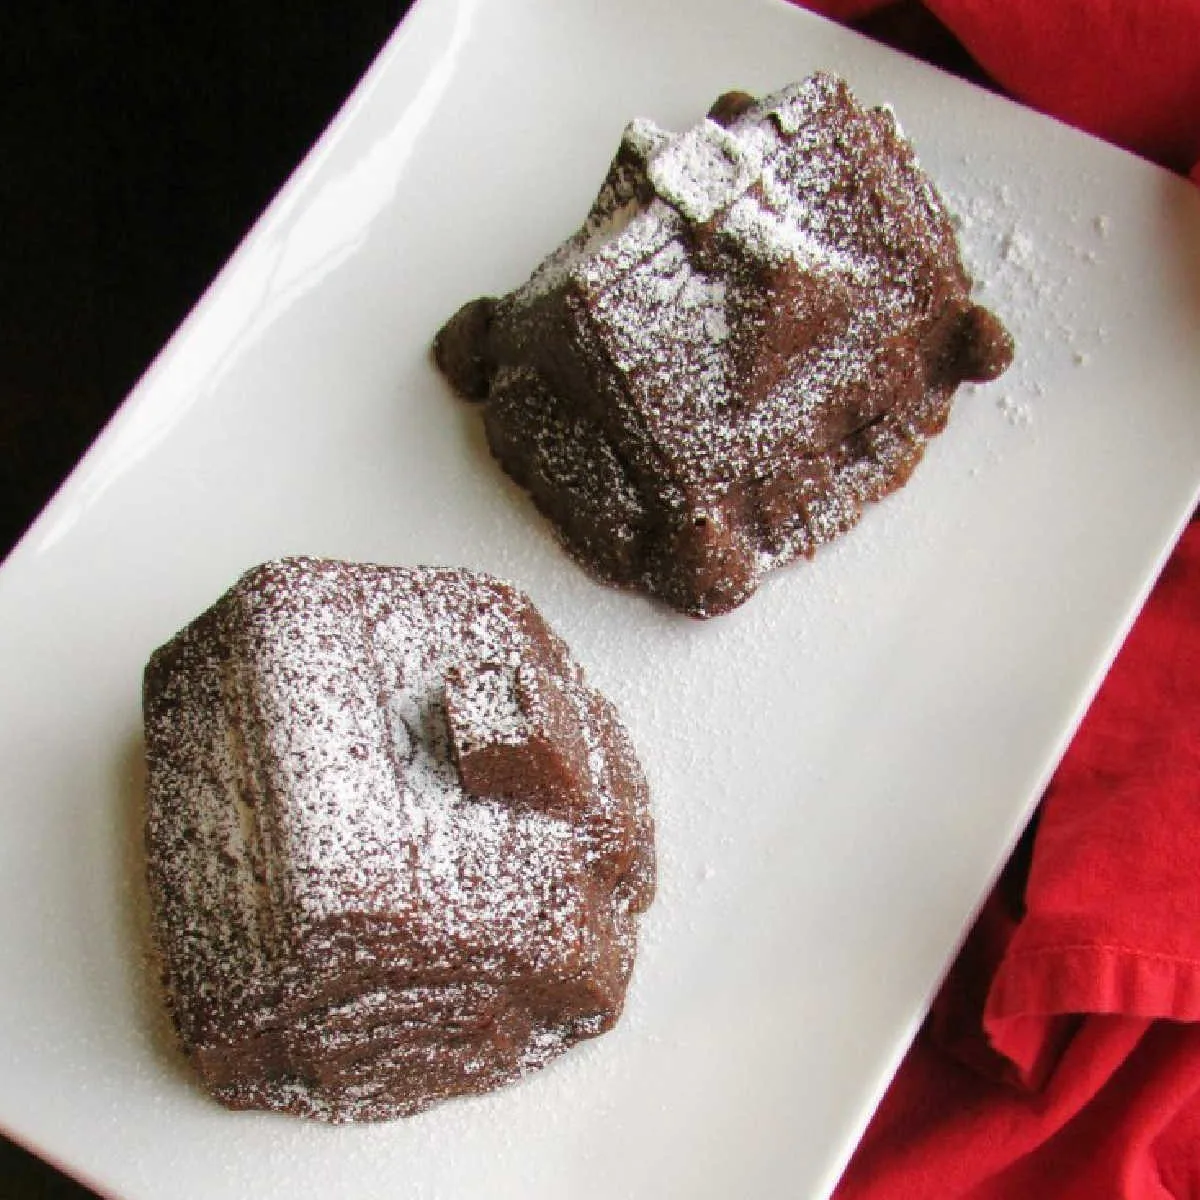 two small gingerbread house cakes on plate with powdered sugar dusting.